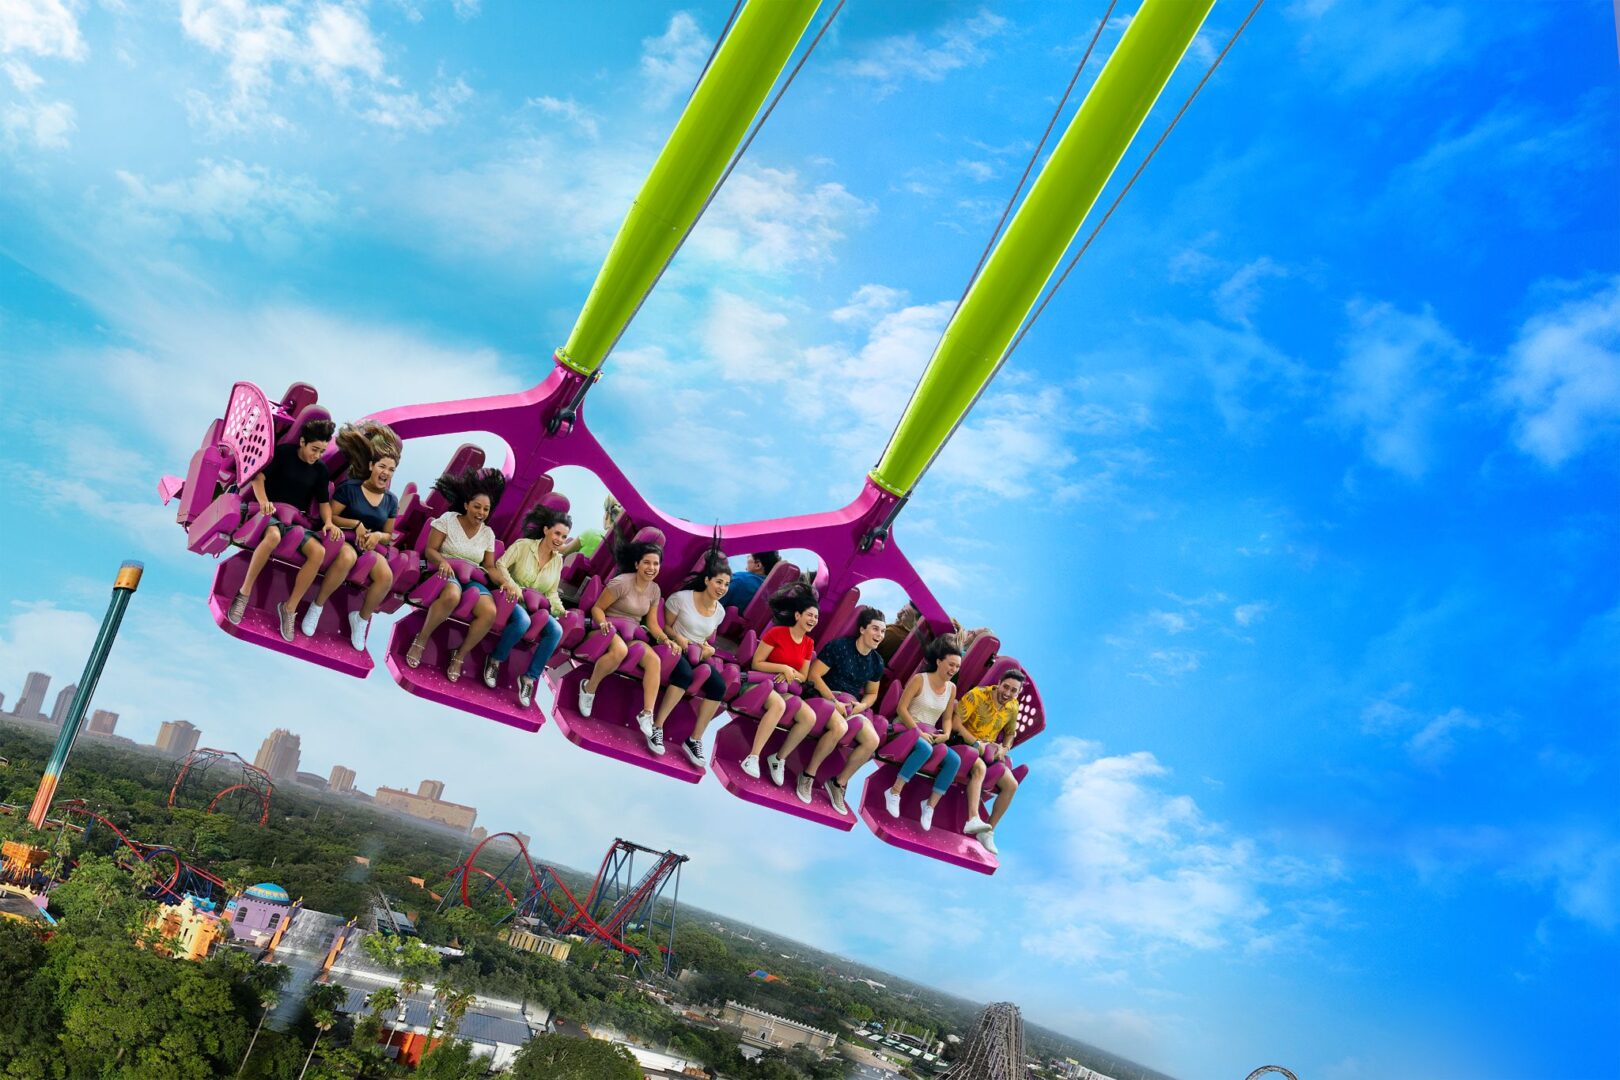 Serengeti Flyer Officially Opens at Busch Gardens Tampa Bay